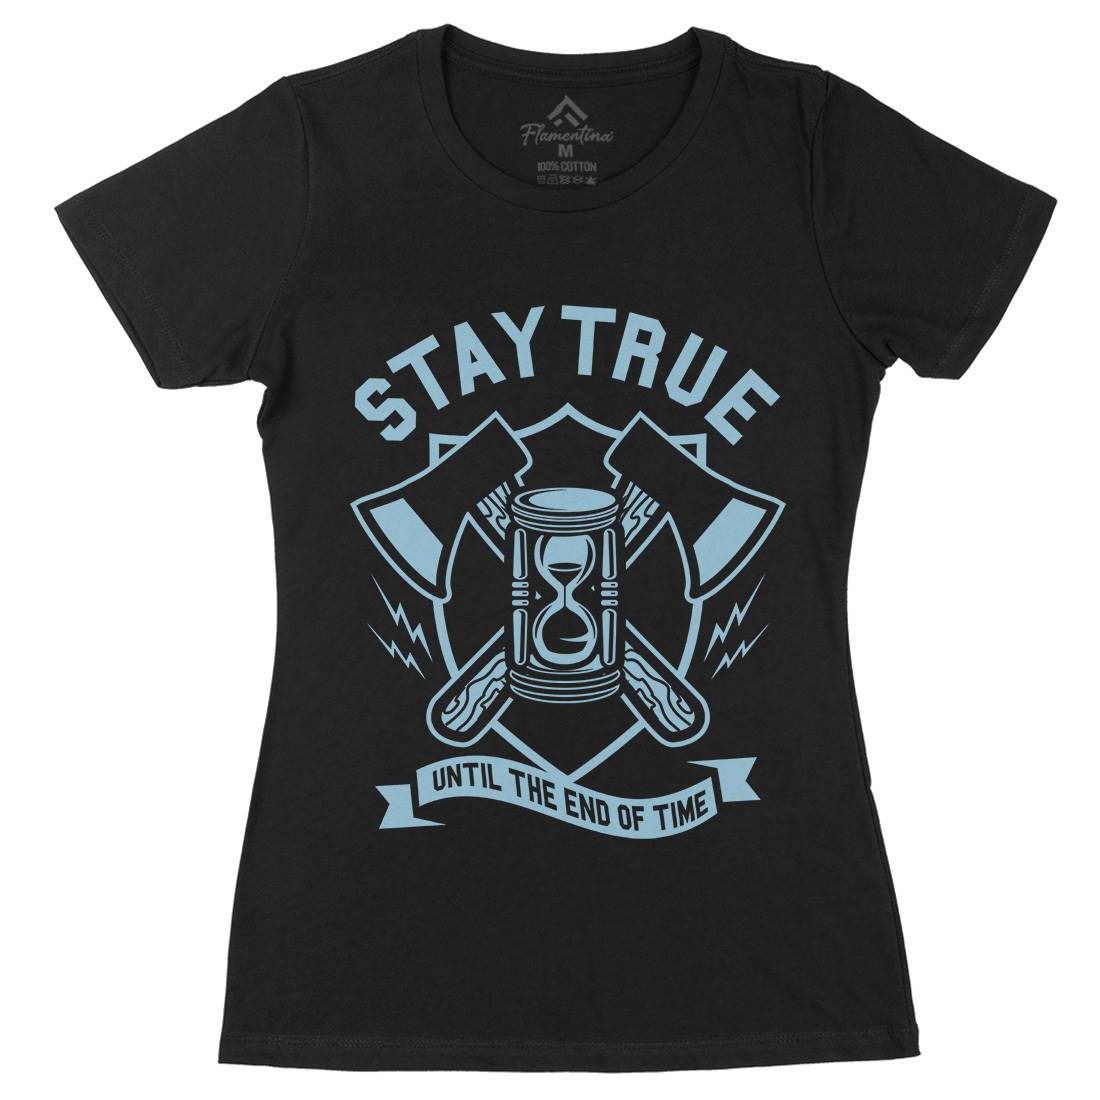 Stay True Womens Organic Crew Neck T-Shirt Quotes A285